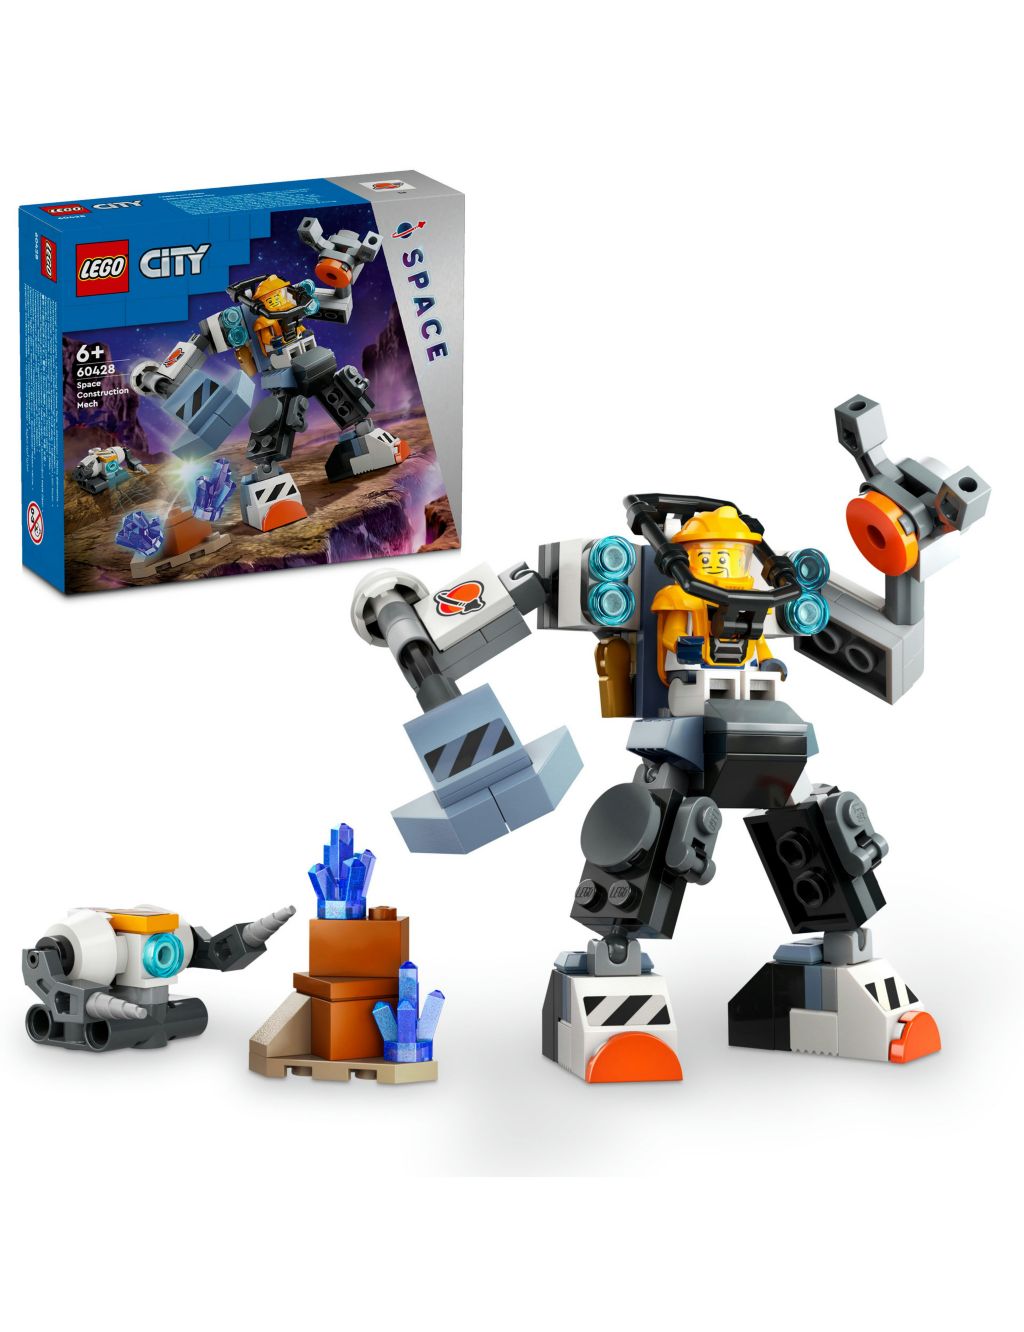 LEGO® City Space Construction Mech Suit Toy 60428 (6+ Yrs) 3 of 4